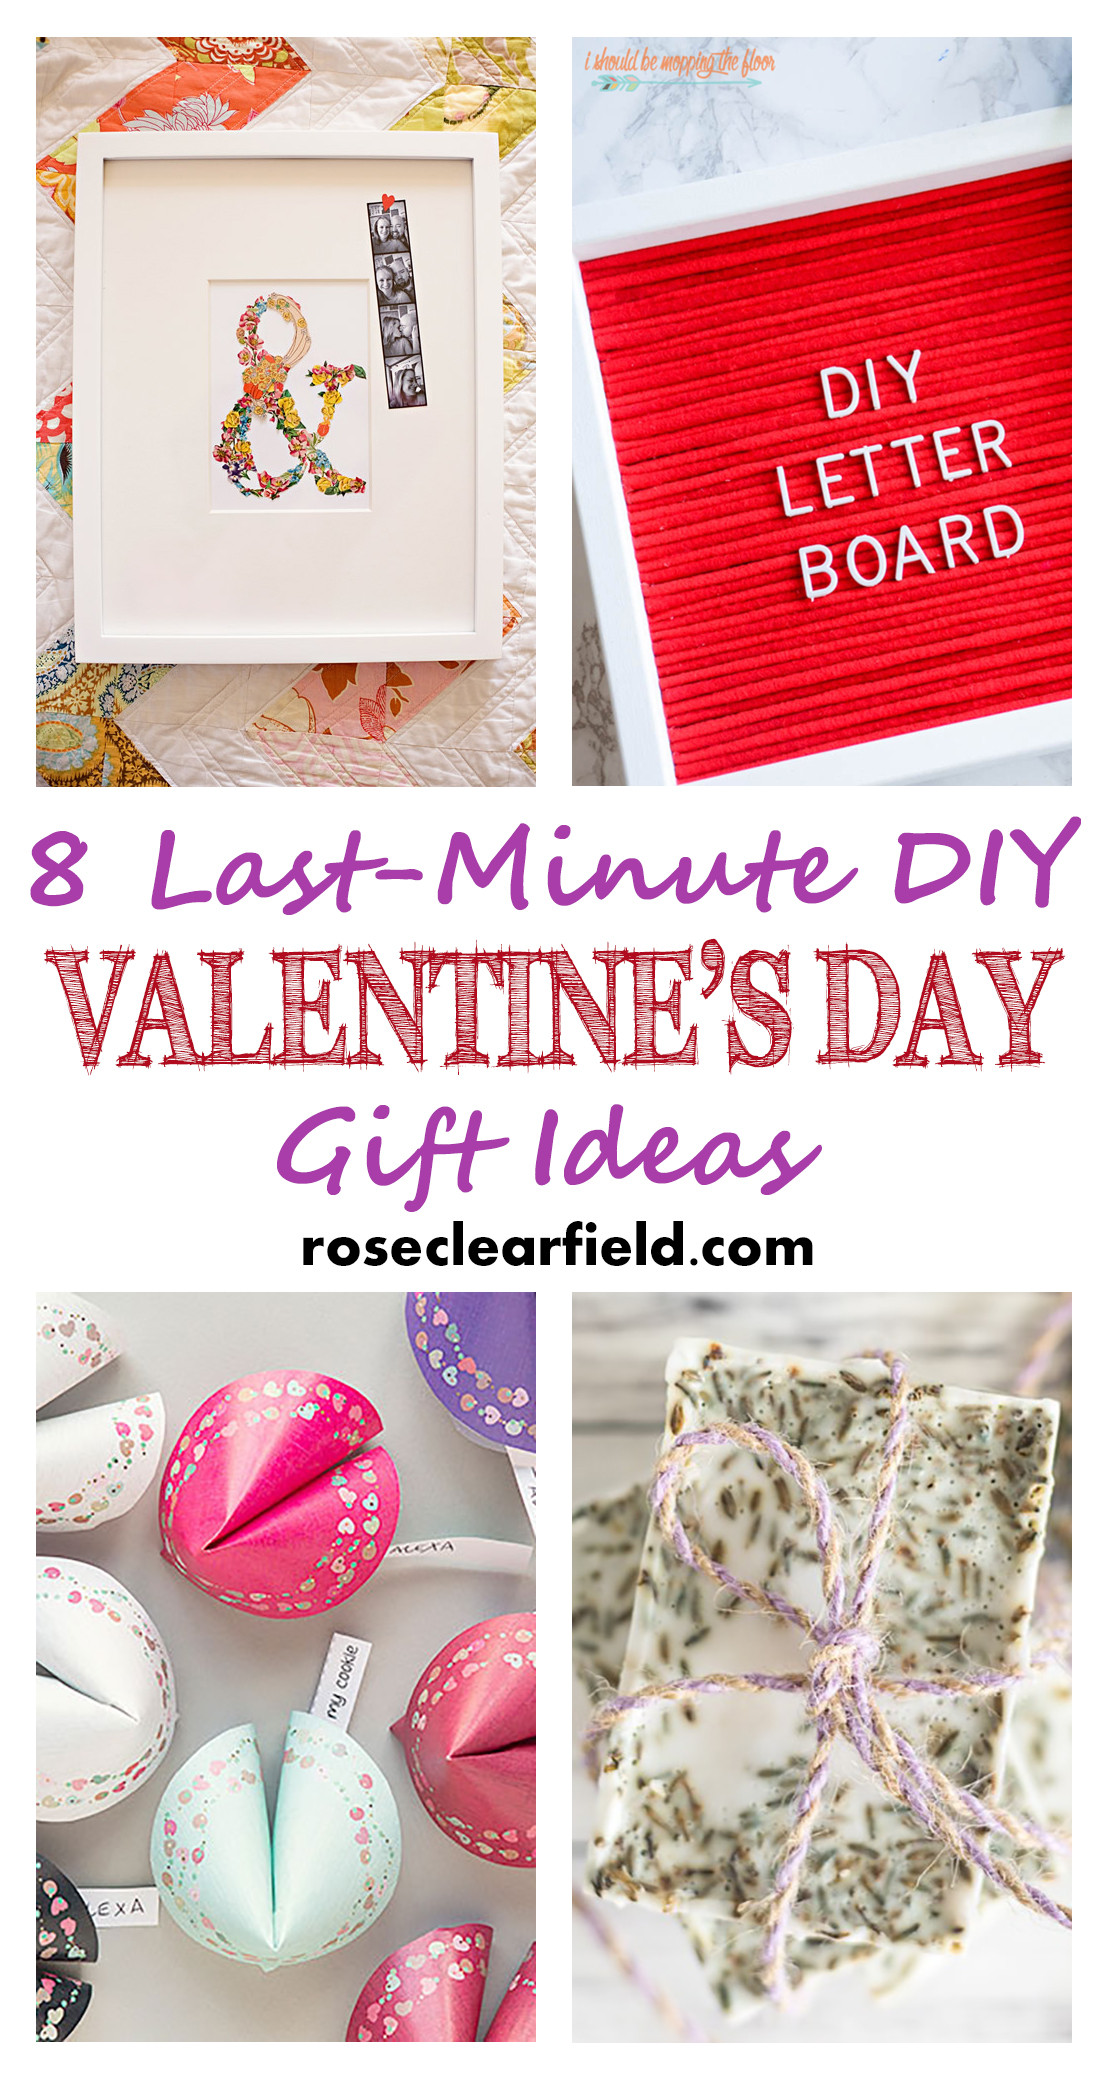 Homemade Valentines Day Gifts
 Last Minute DIY Valentine s Day Gift Ideas • Rose Clearfield